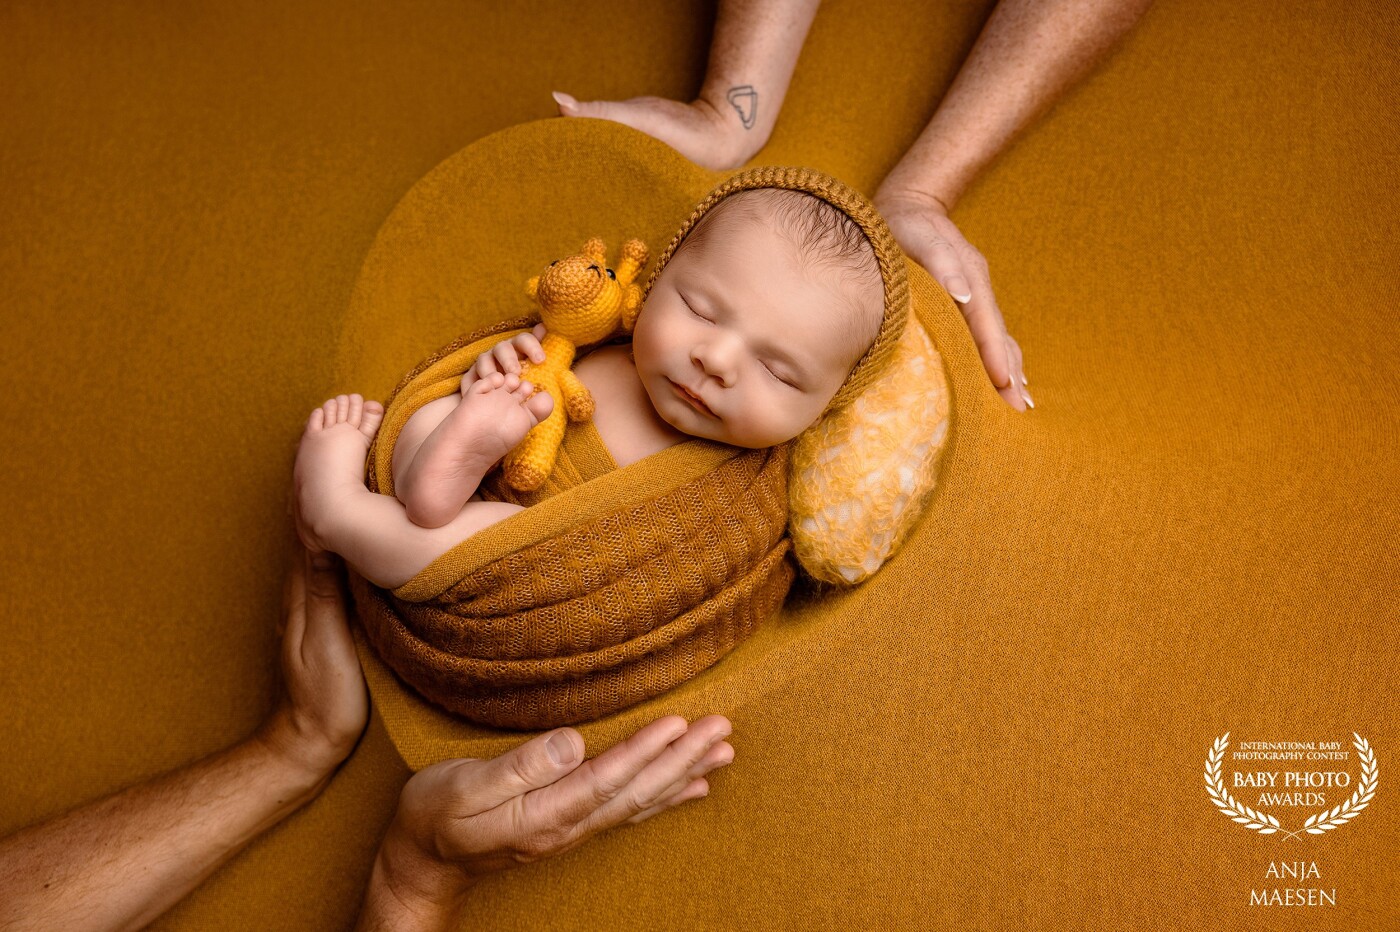 I loved to incorporate the parents' hands in this heart pose... This little man was just so sweet and the mustard colour pops out but keeps the attention on the baby...